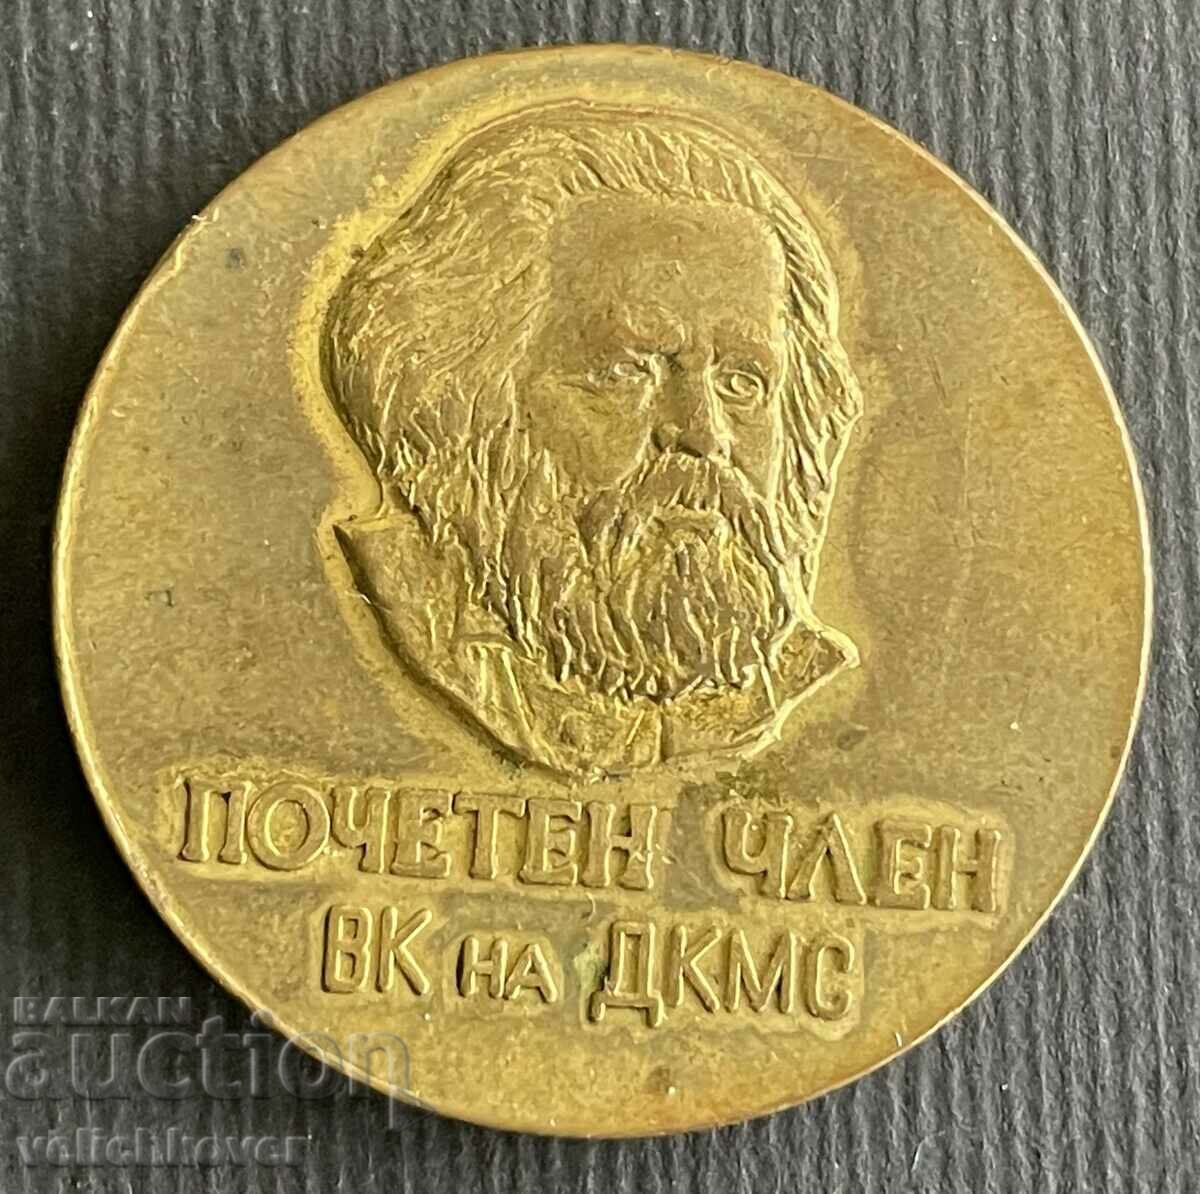 36625 Bulgaria mini plaque Honorary member of the VC High Committee DKMS